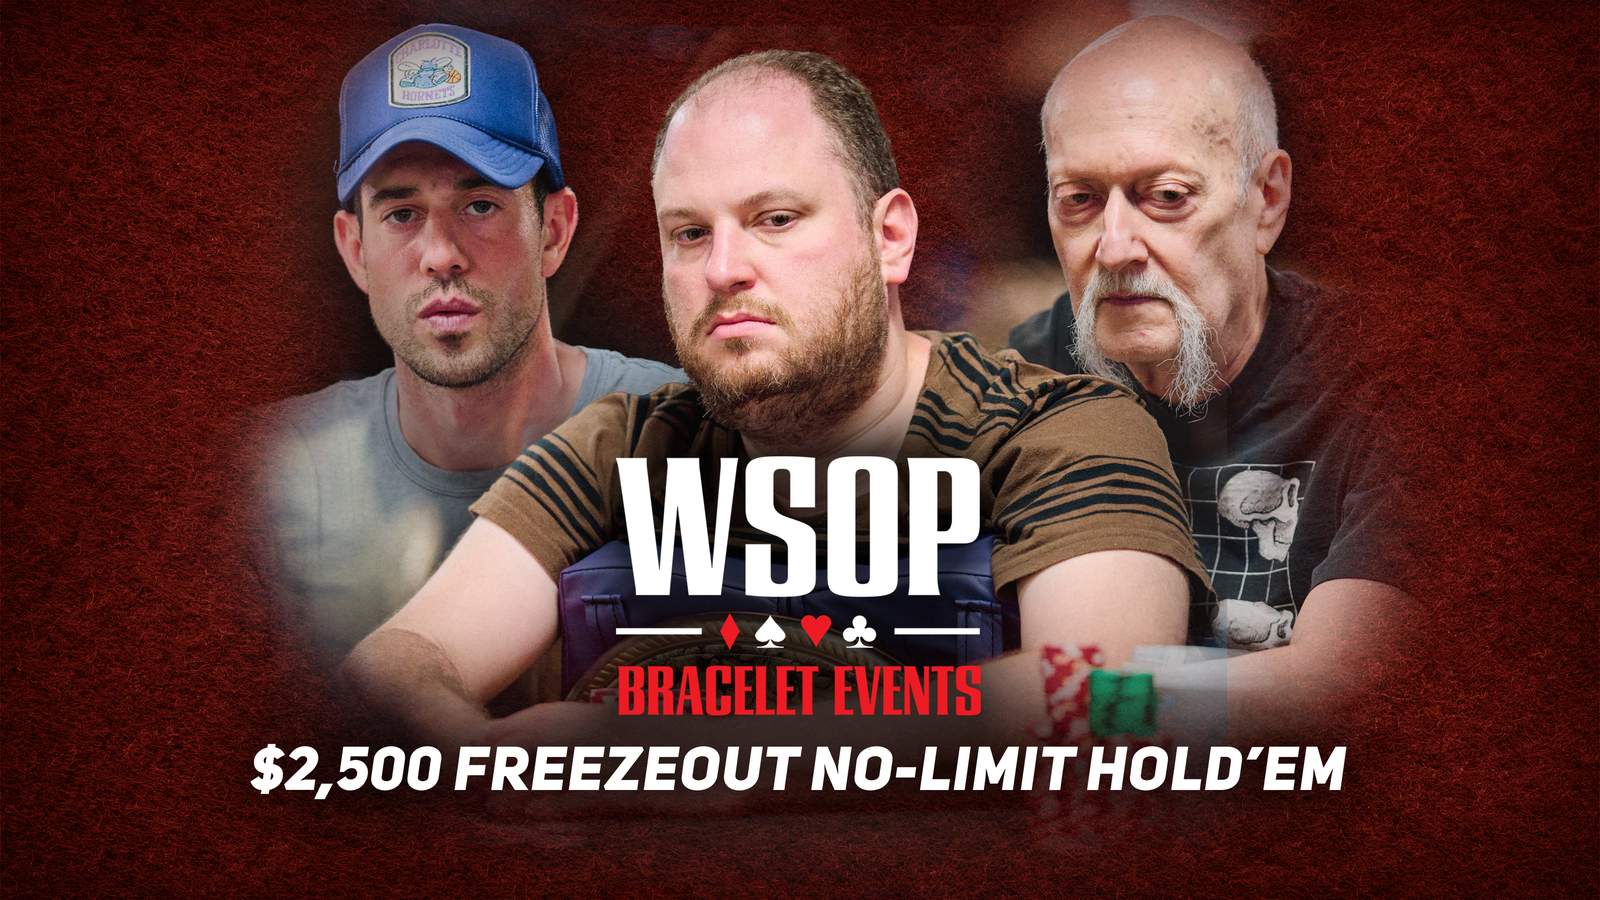 Watch the WSOP Event #3: $2.5k No-Limit Hold'em Freezeout Final Table on PokerGO.com at 8 p.m. ET